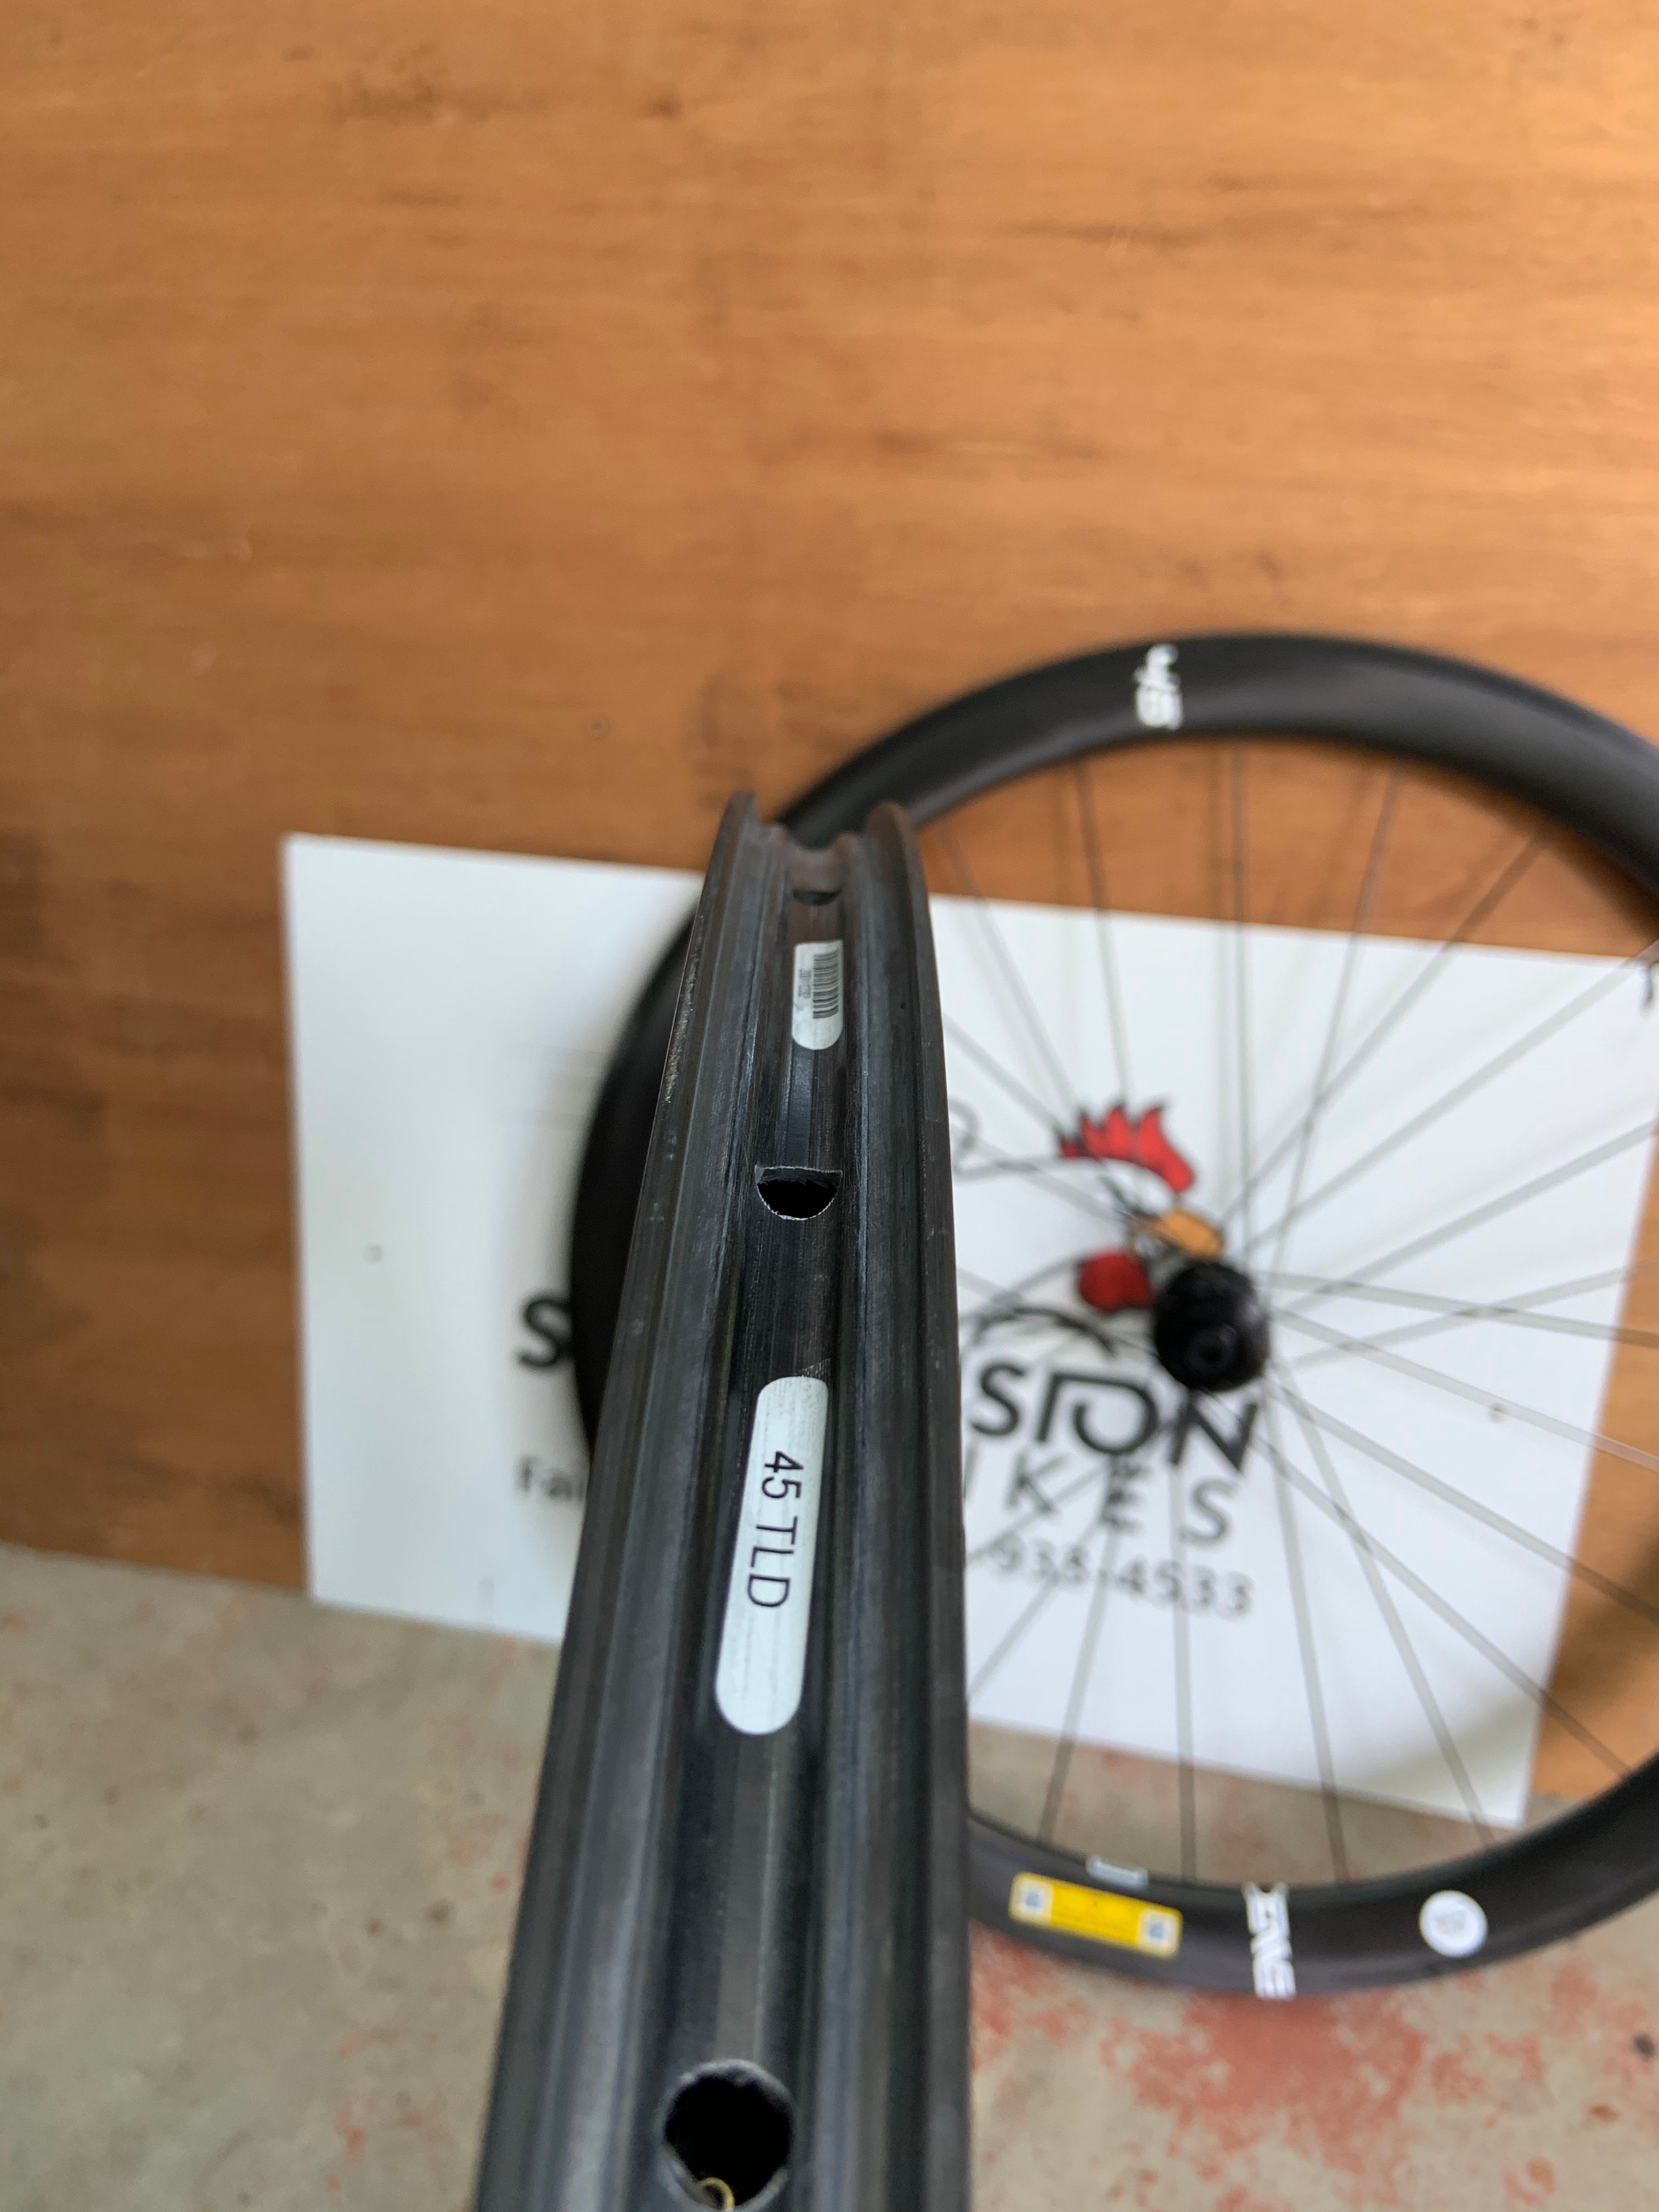 CLOSEOUT ENVE Foundation 45 and 65 Disc brake Wheelsets